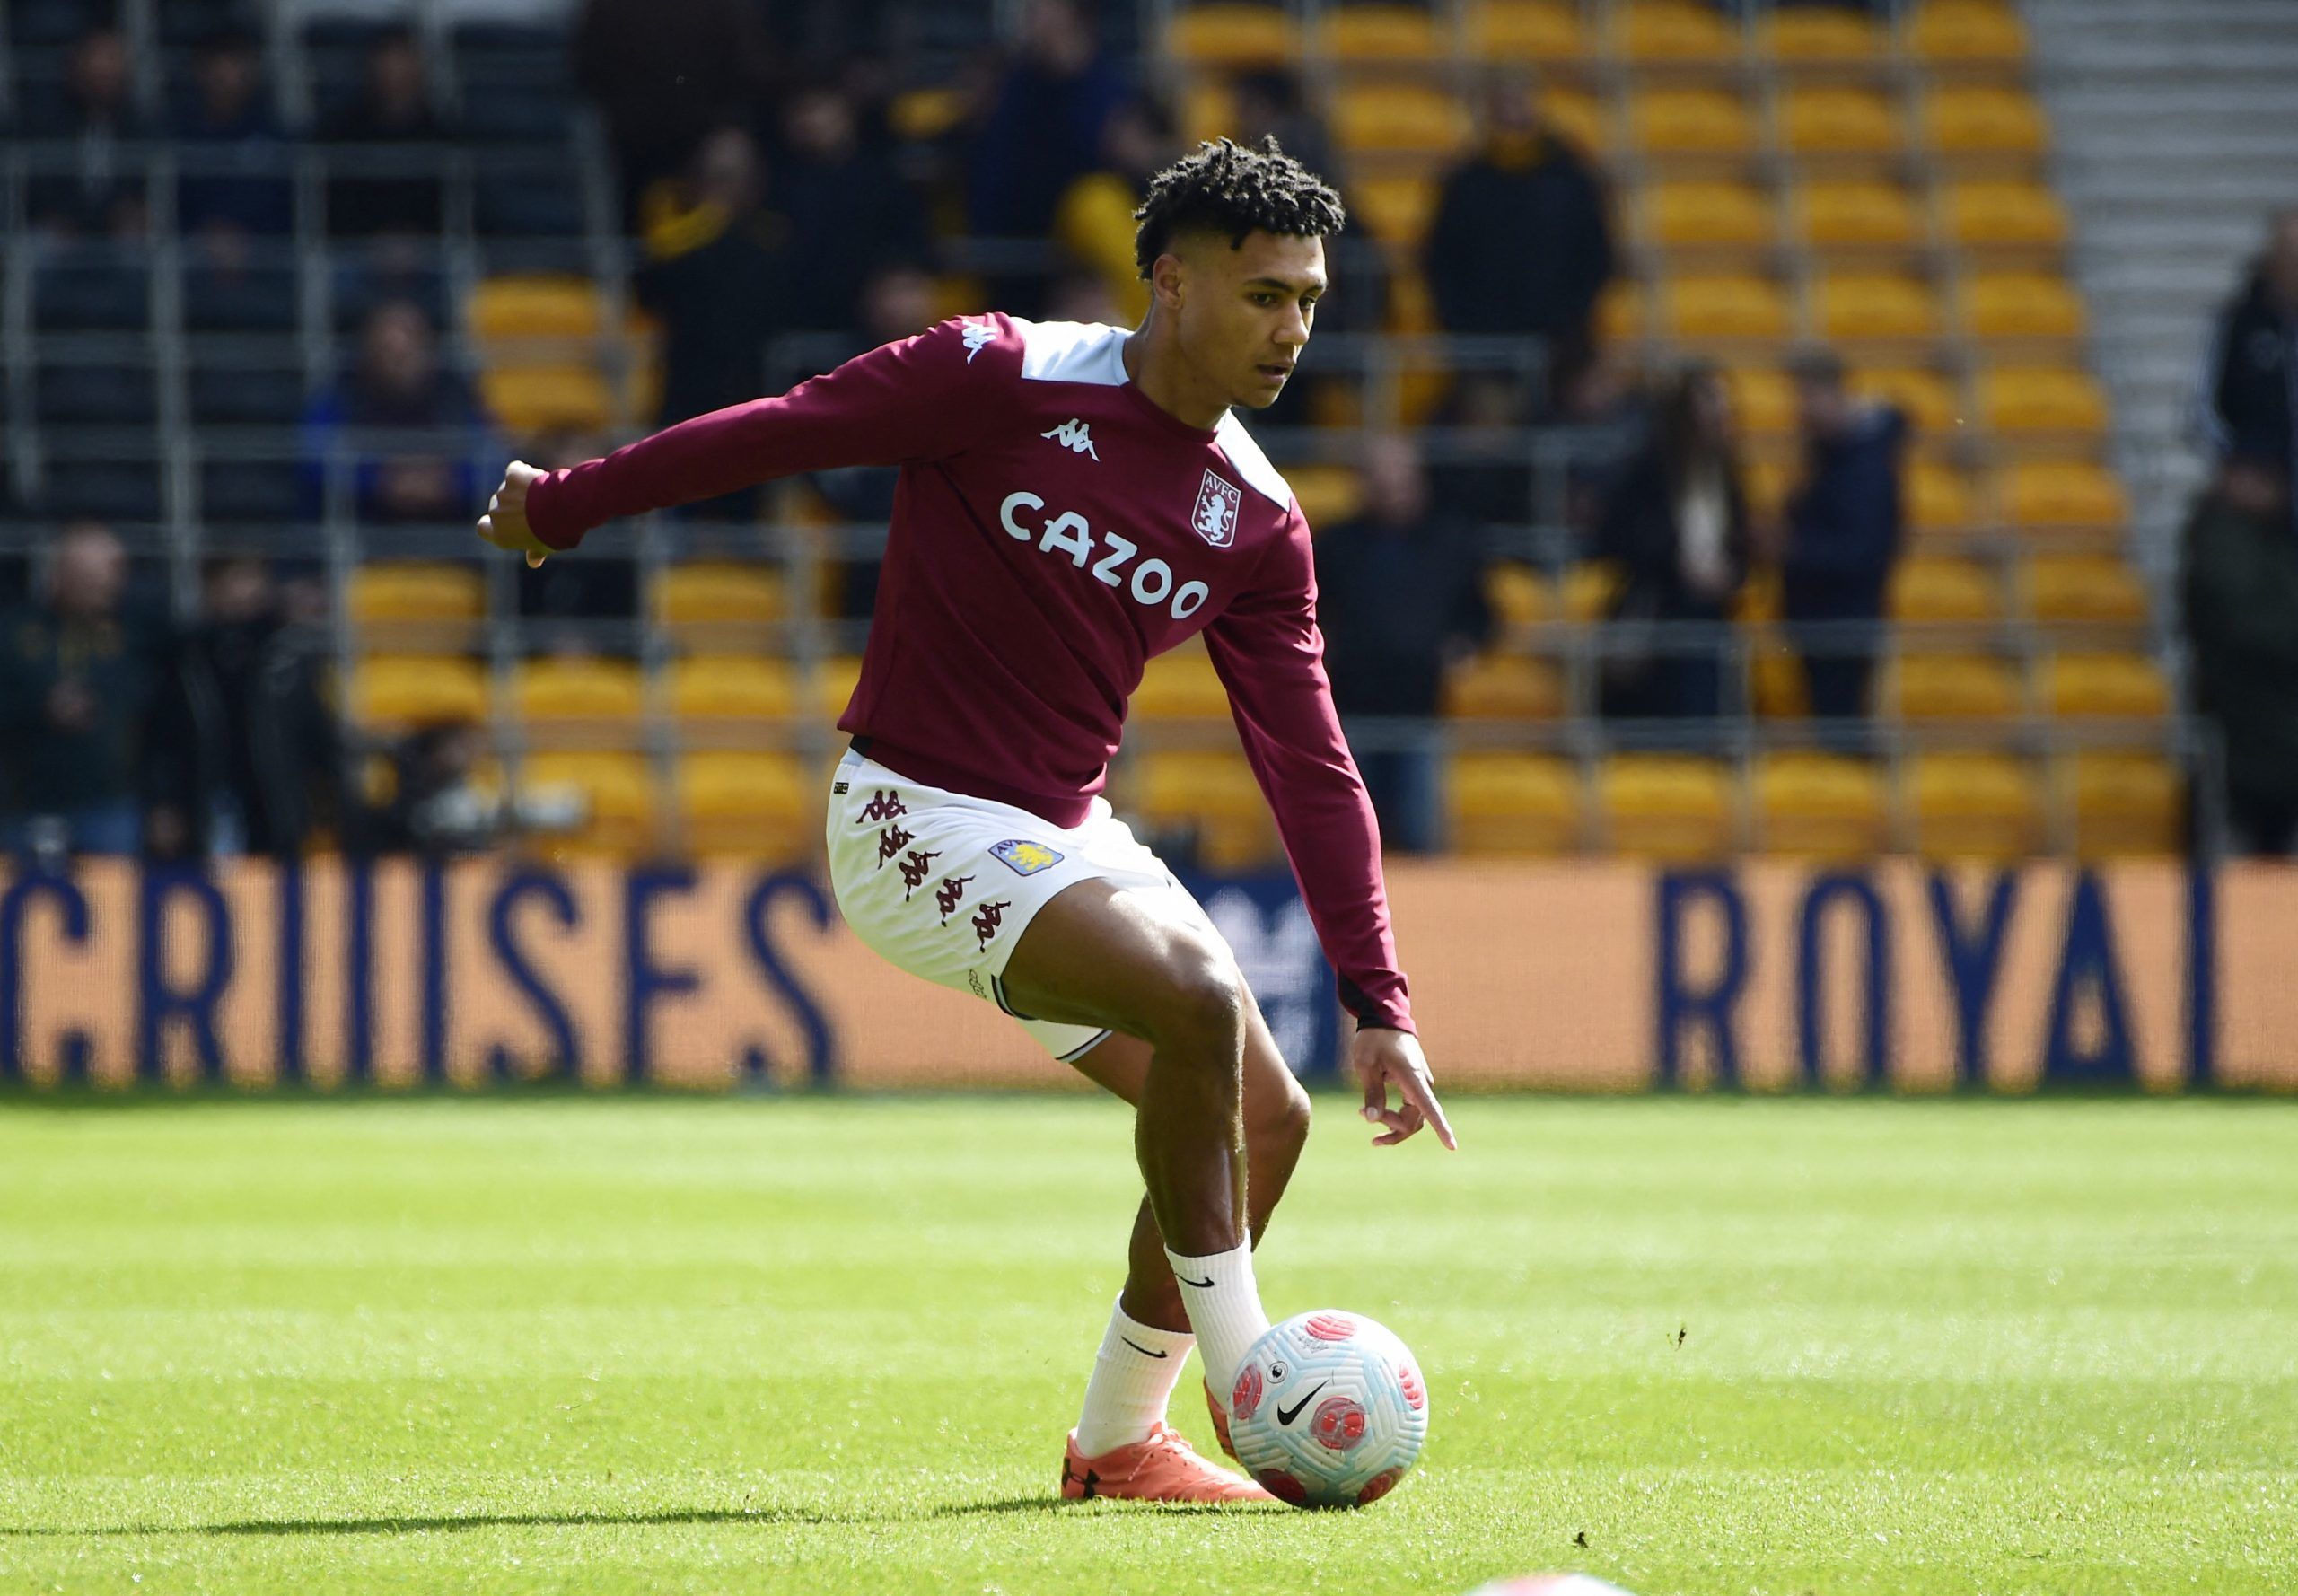 Soccer Football - Premier League - Wolverhampton Wanderers v Aston Villa - Molineux Stadium, Wolverhampton, Britain - April 2, 2022 Aston Villa's Ollie Watkins during the warm up before the match REUTERS/Rebecca Naden EDITORIAL USE ONLY. No use with unauthorized audio, video, data, fixture lists, club/league logos or 'live' services. Online in-match use limited to 75 images, no video emulation. No use in betting, games or single club /league/player publications.  Please contact your account repr